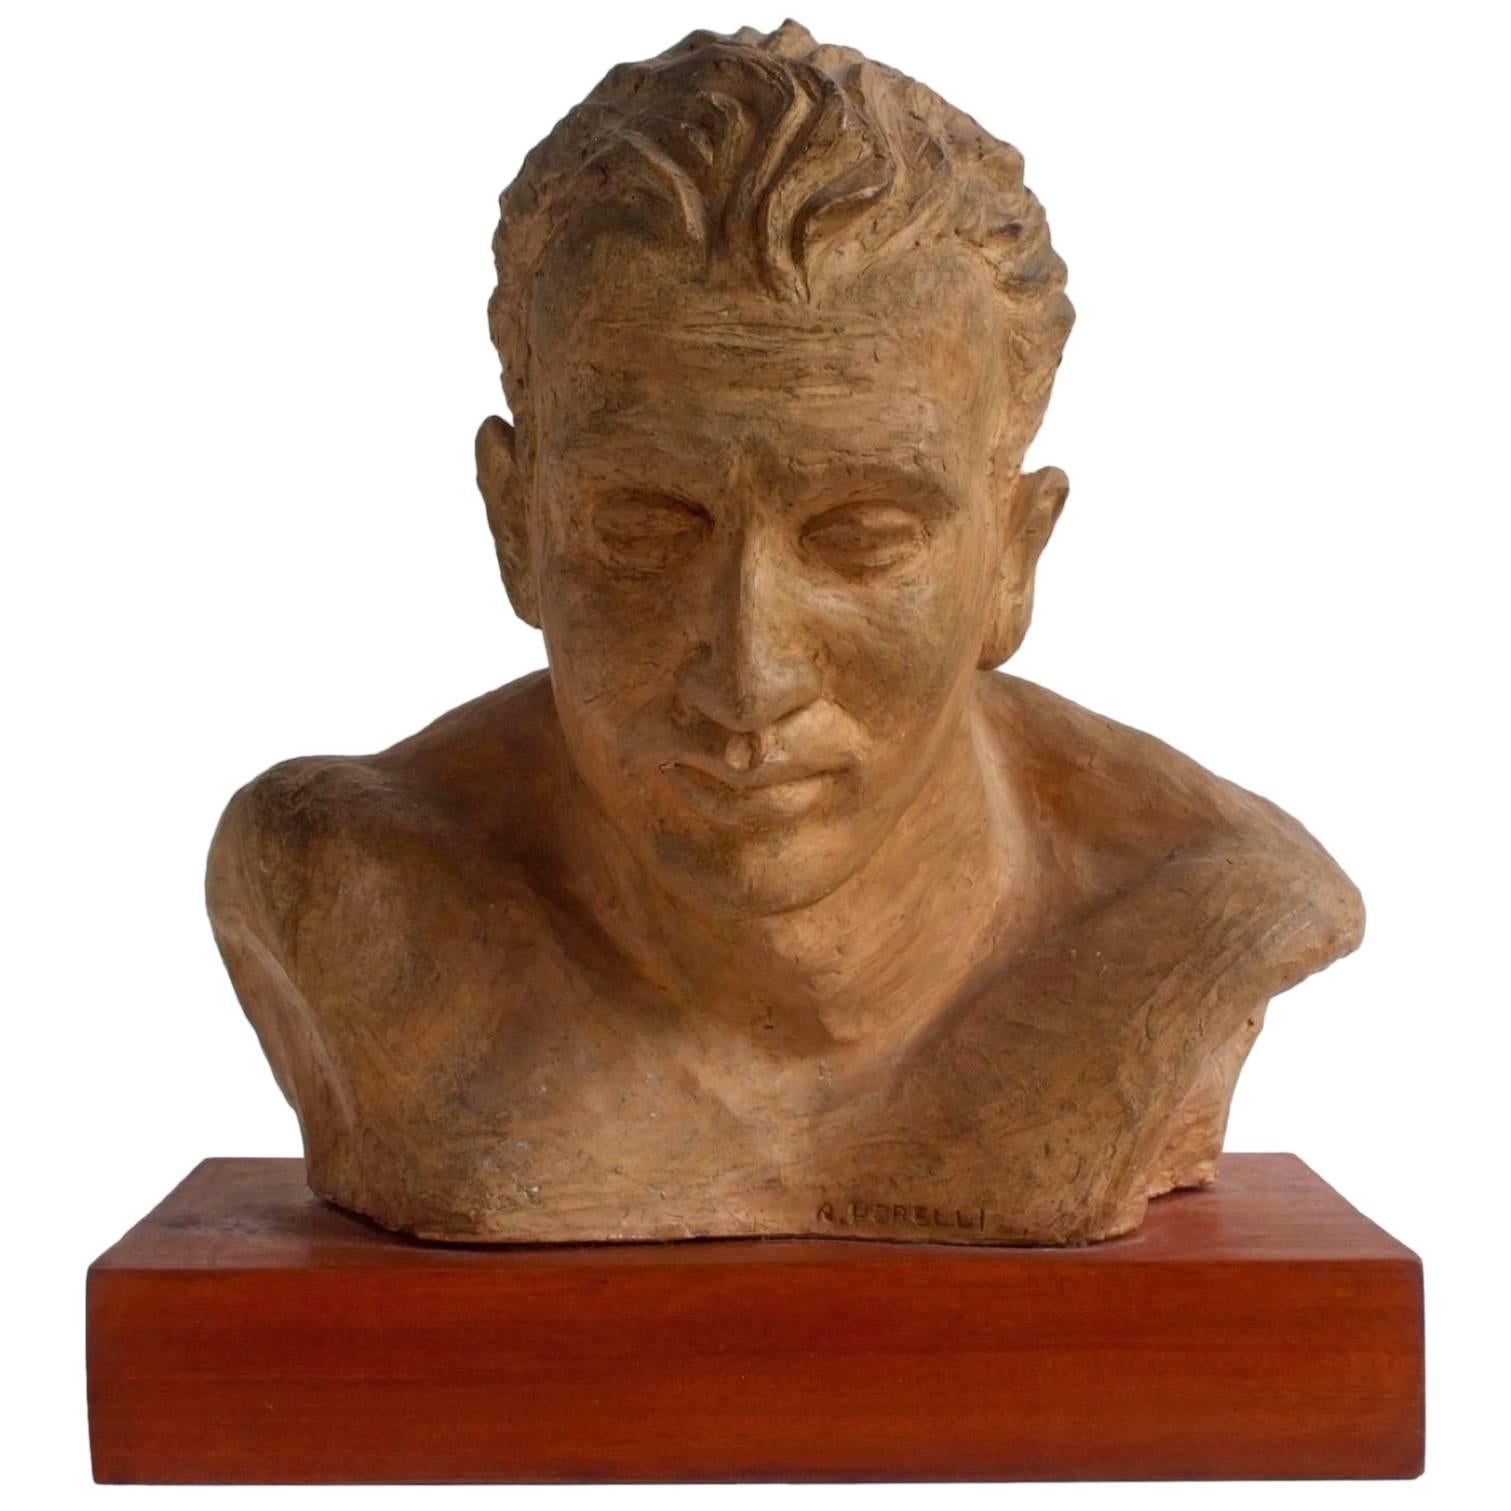 A. Pirelli, Athlete's Clay Bust Sculpture, 1950s, Signed